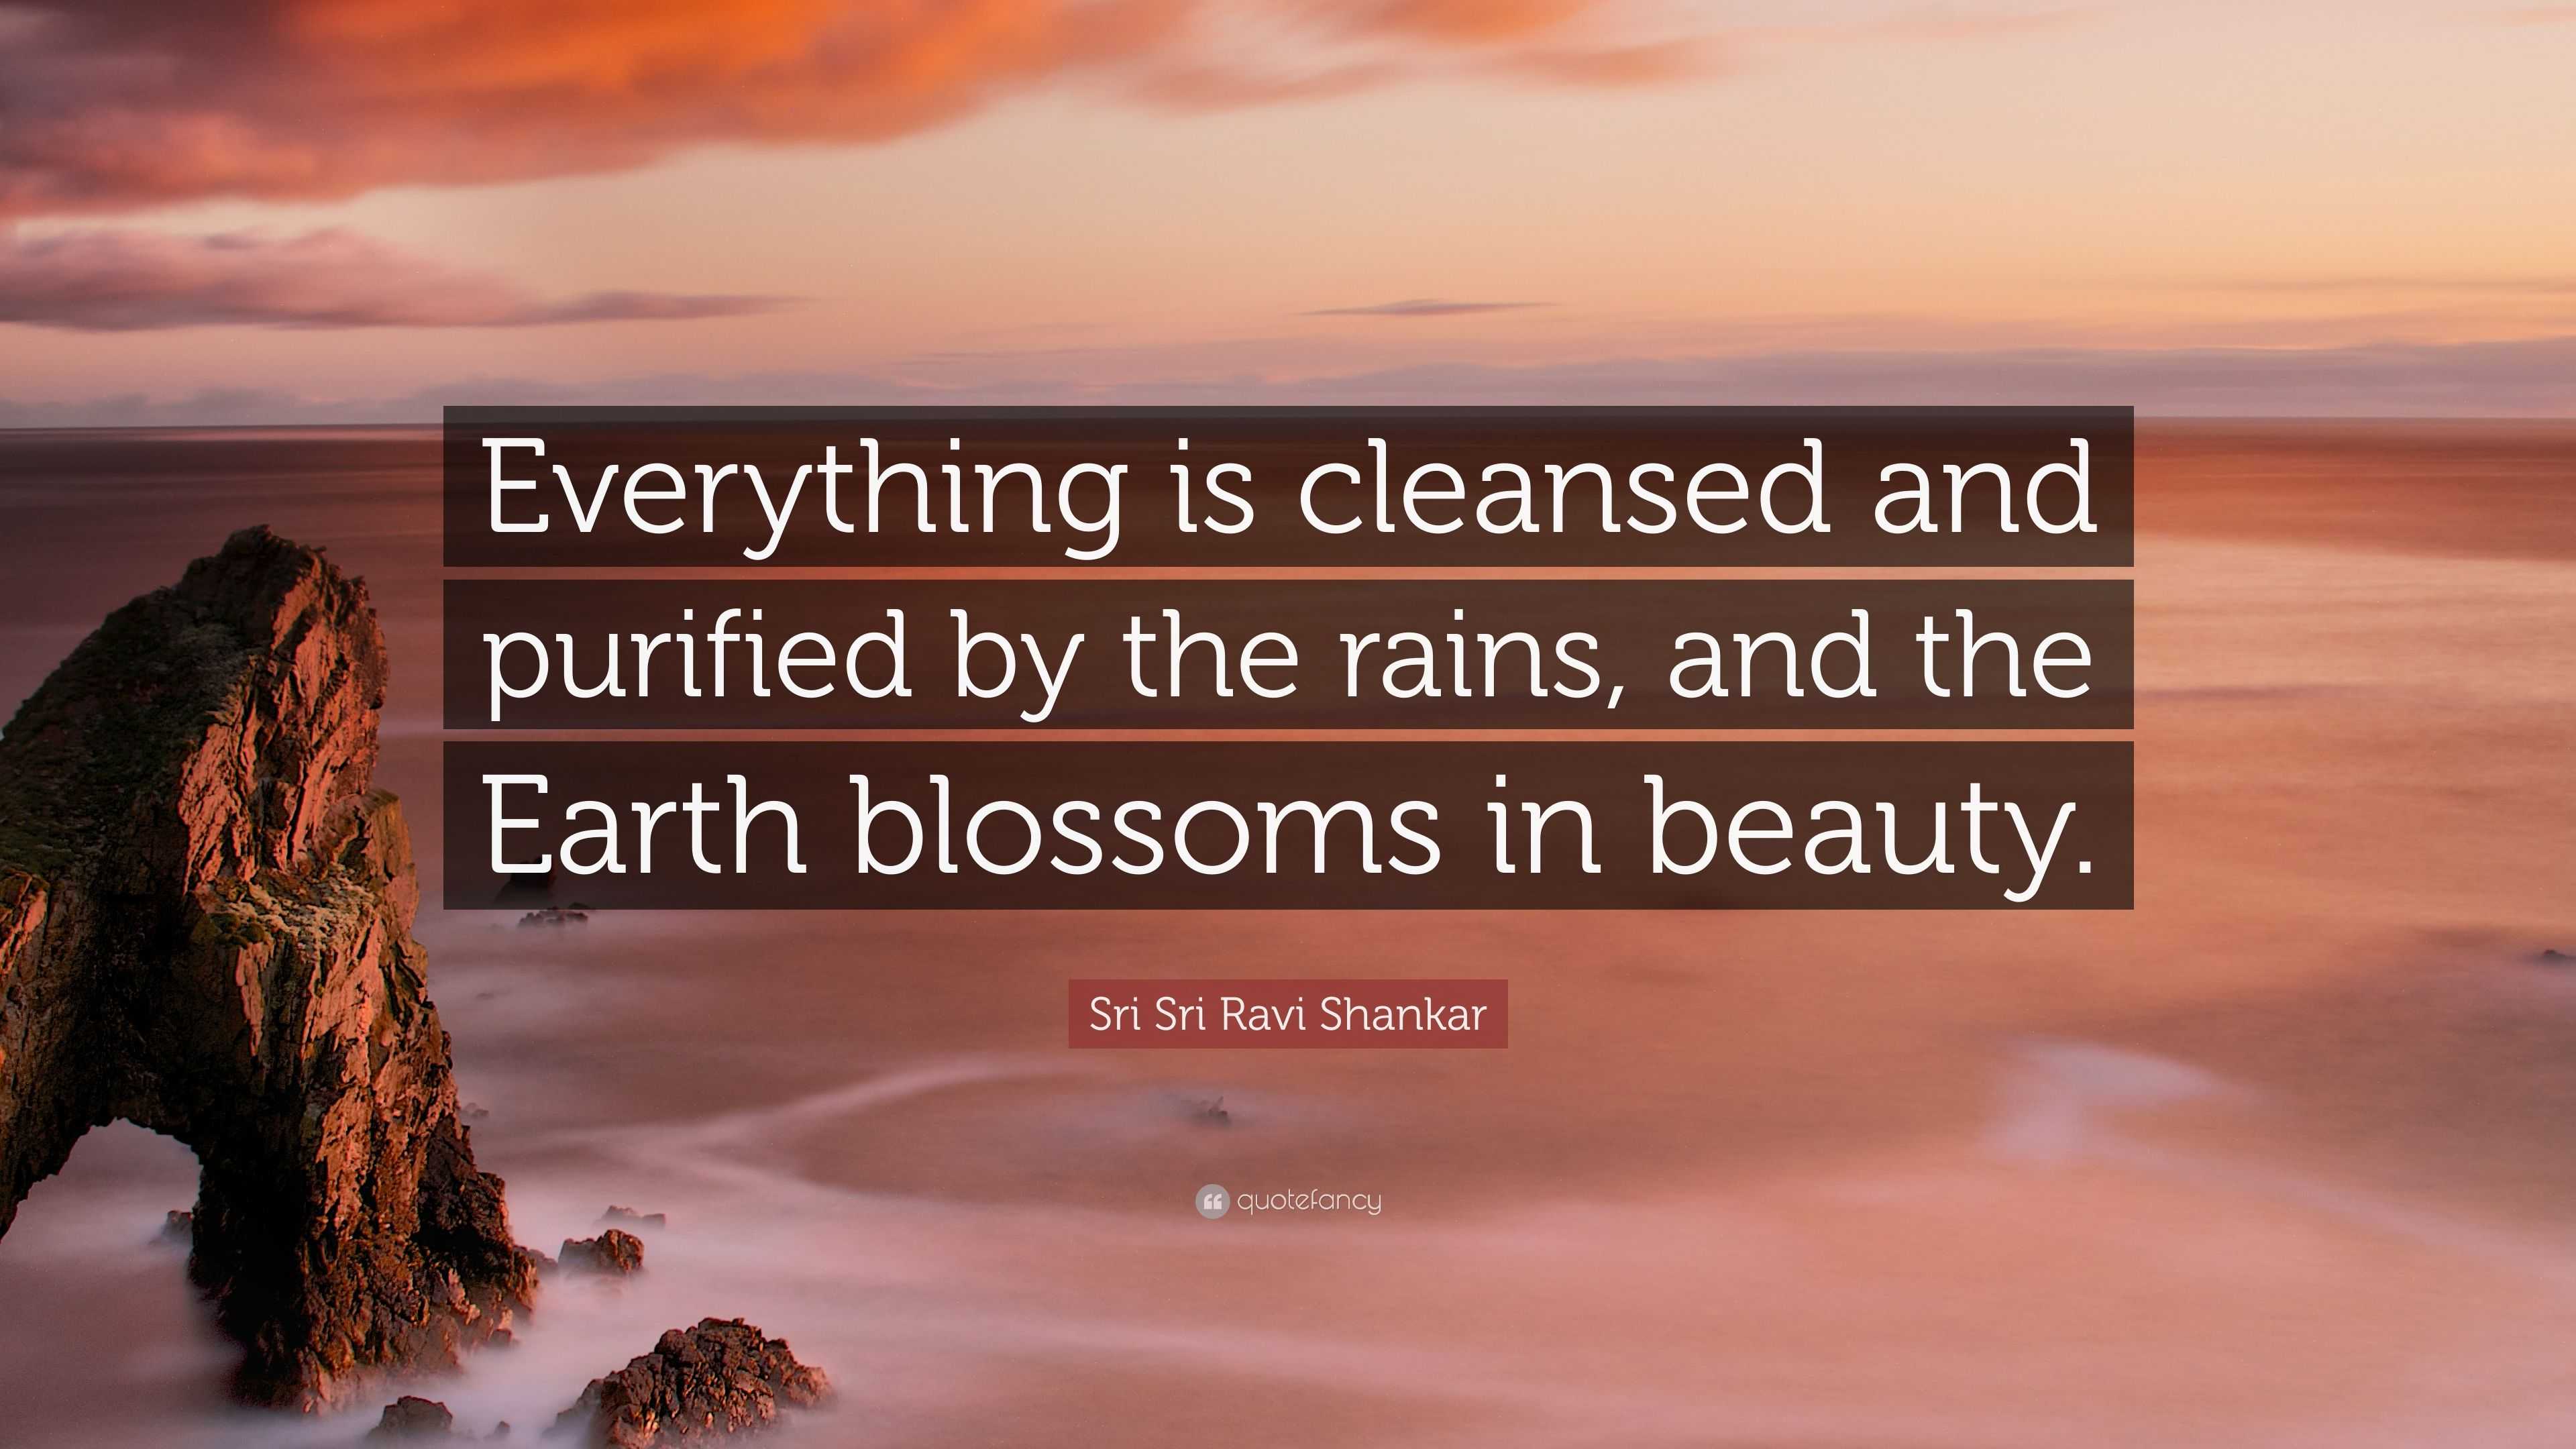 Sri Sri Ravi Shankar quote: Everything is cleansed and purified by the  rains, and the